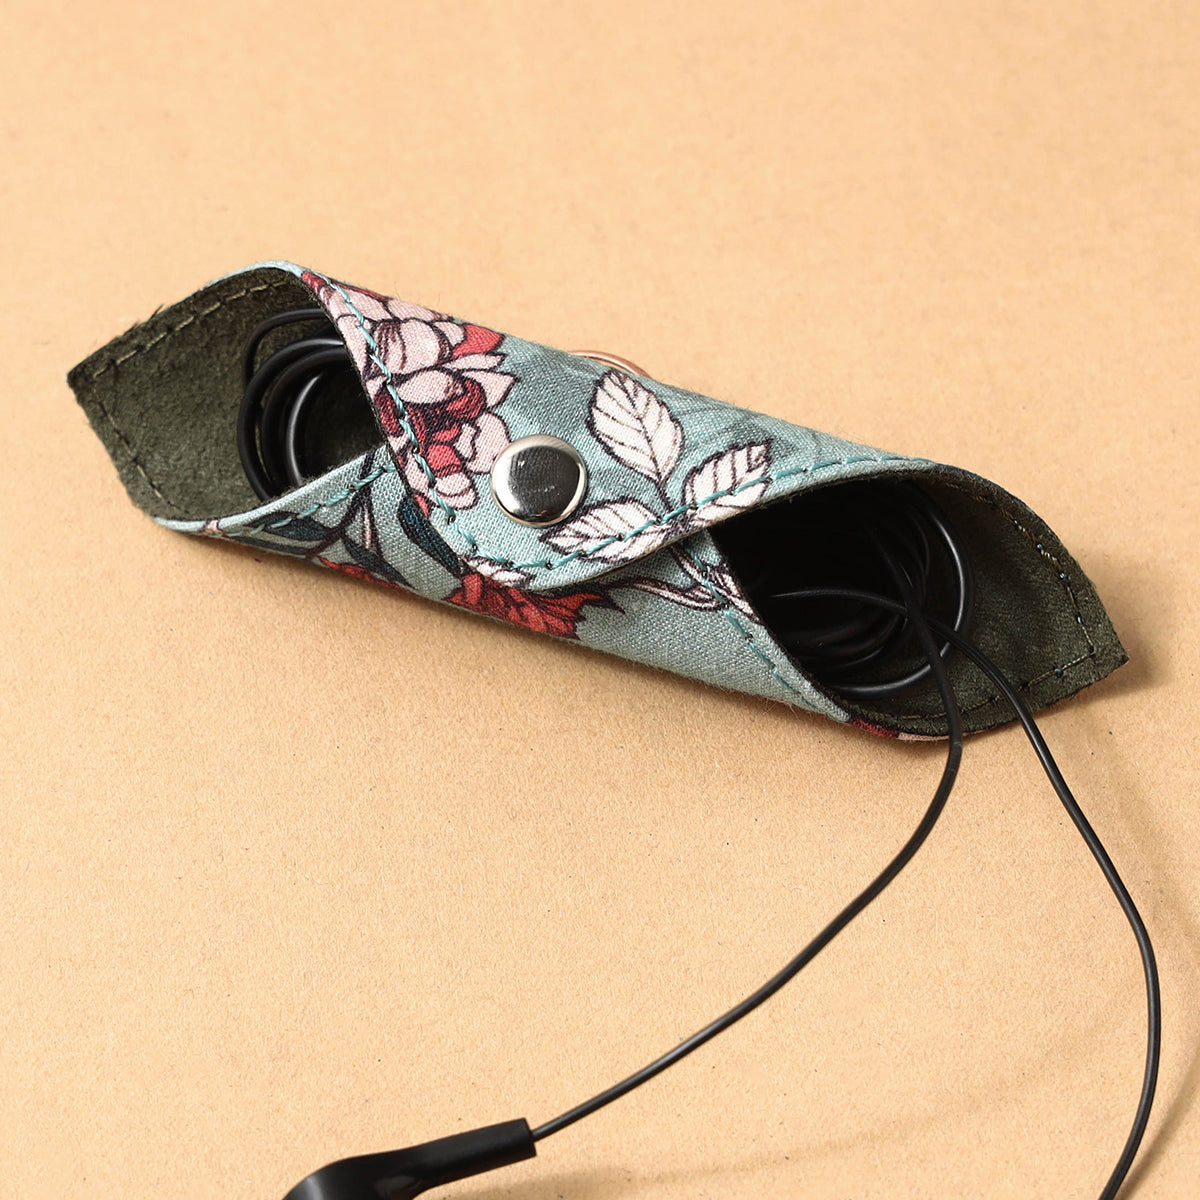 Floral Printed Handcrafted Cable Organiser